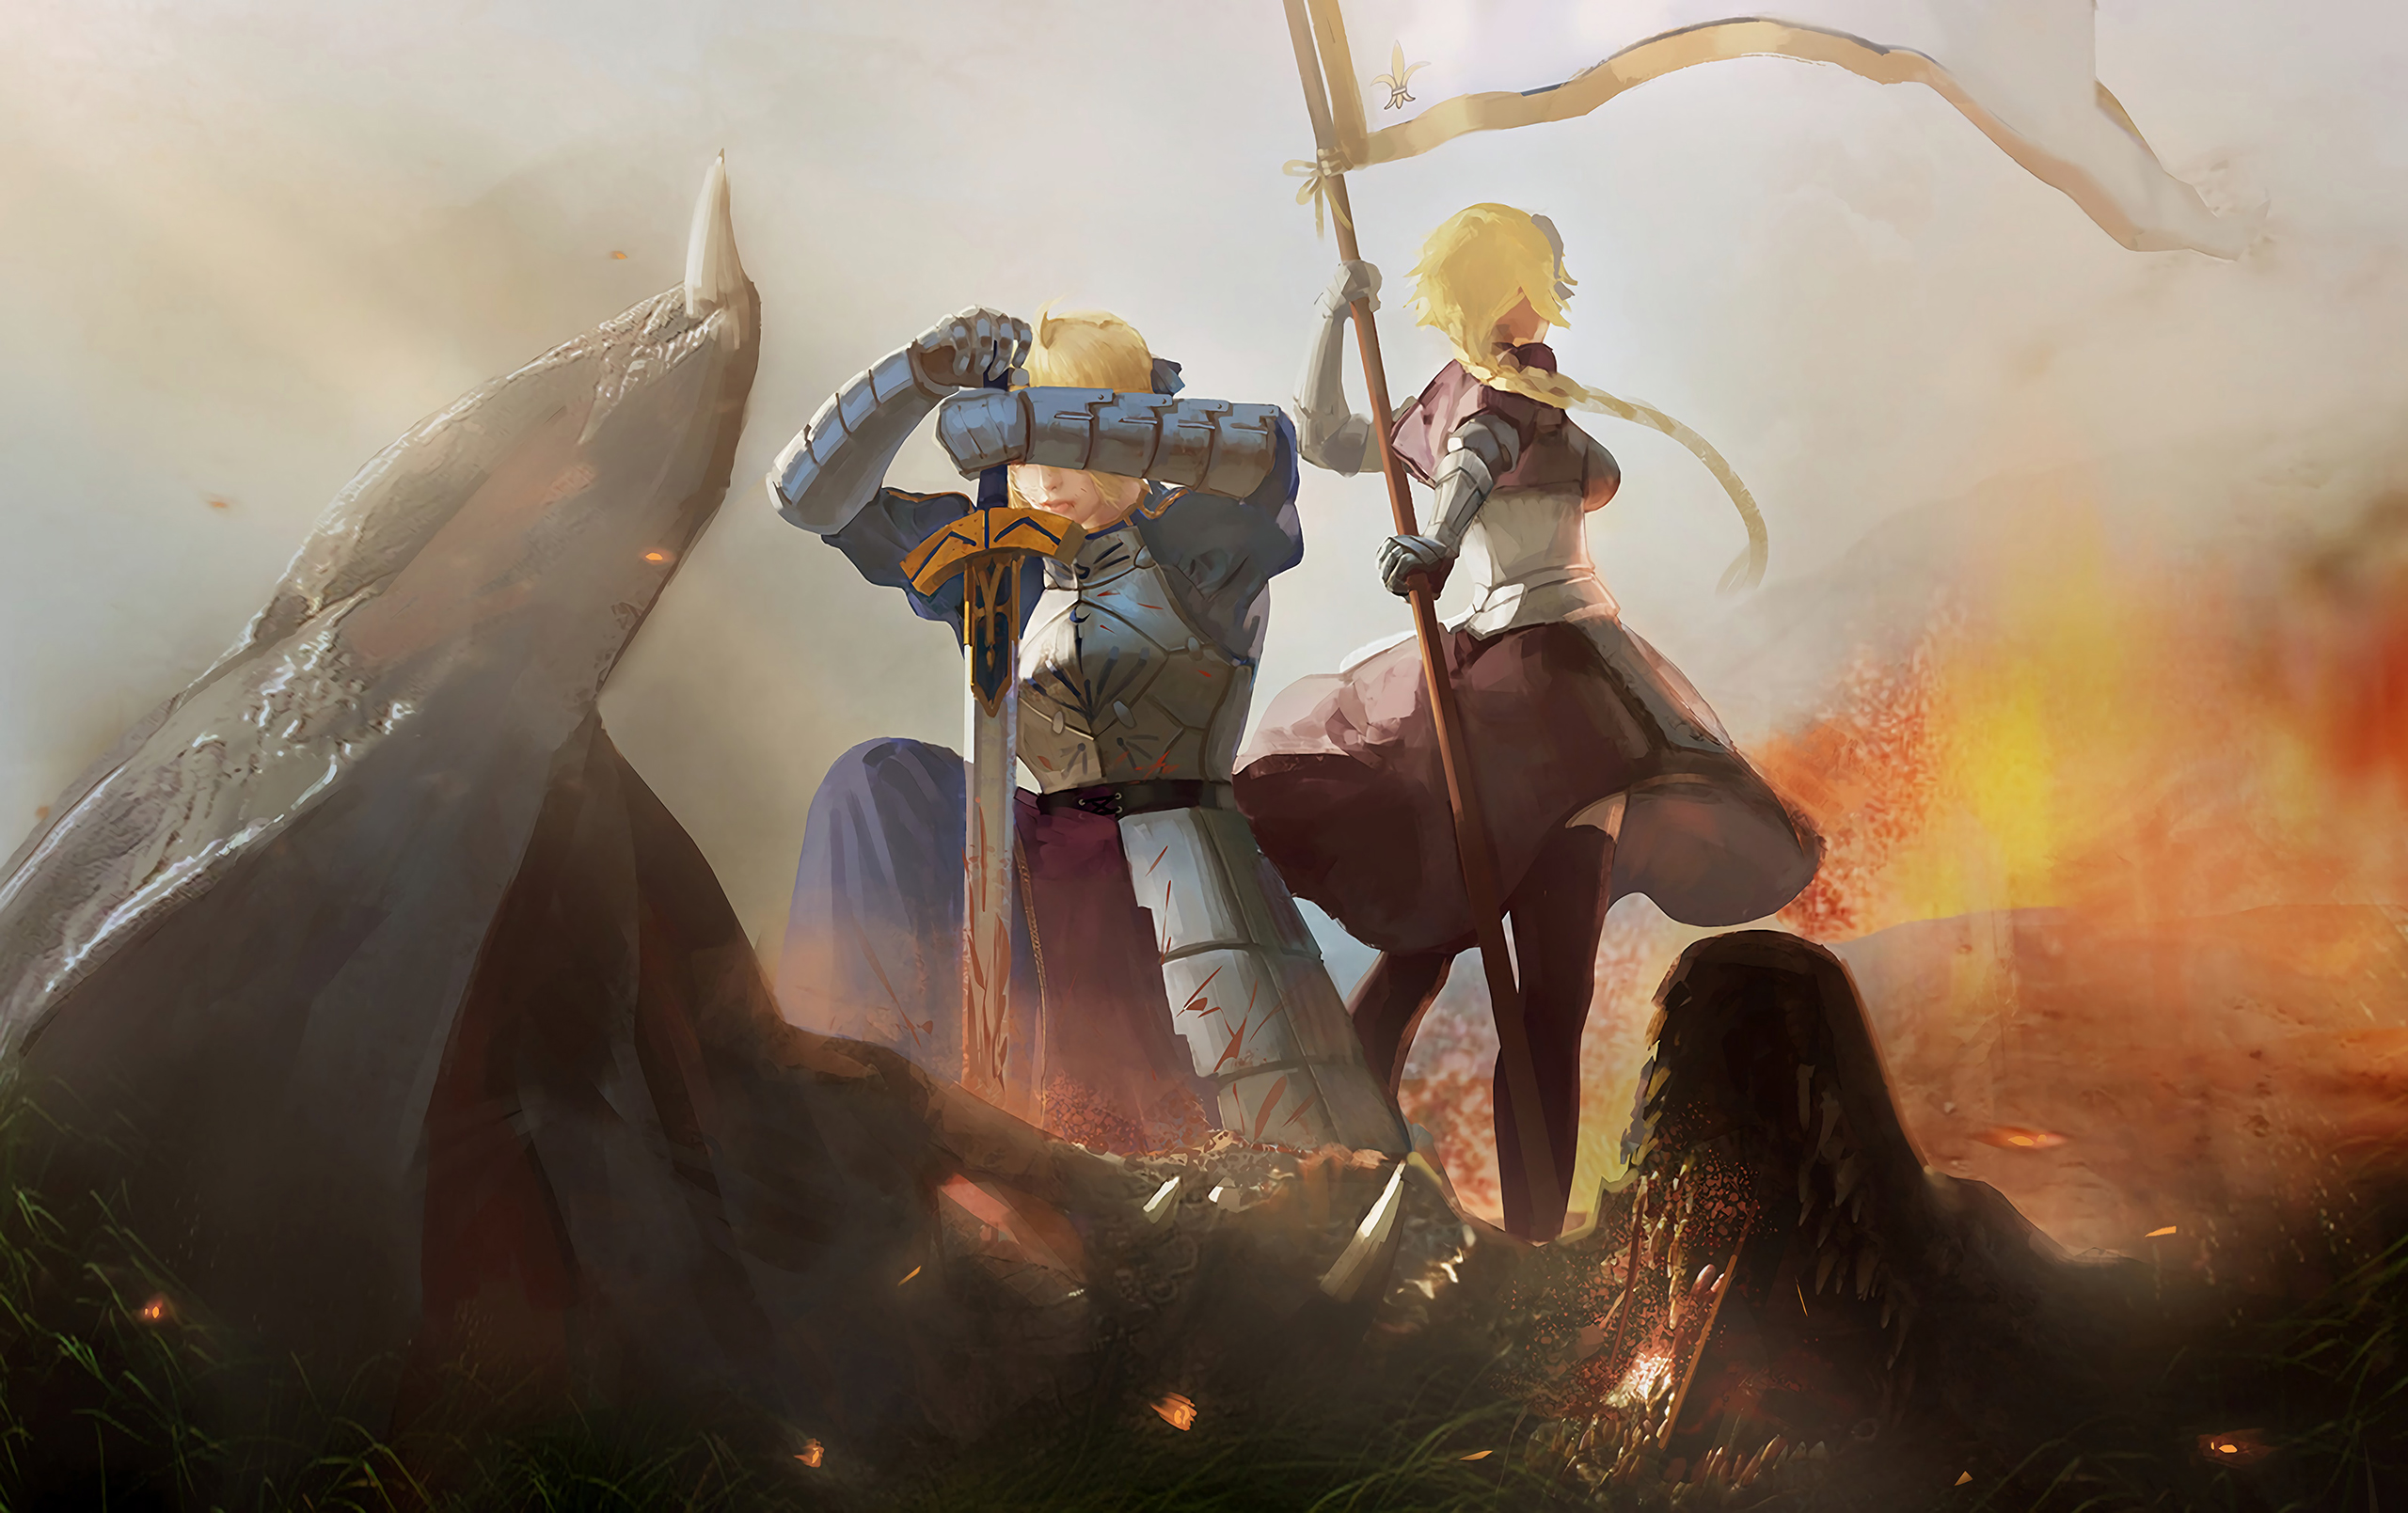 Anime 2560x1609 Fate/Grand Order Fate series Ruler (Fate/Grand Order) Saber Artoria Pendragon spear flag creature fire Fleur de Lis blood anime girls blonde long hair video games Fate/Stay Night Fate/Apocrypha  Jeanne d'Arc (Fate) 2D armored woman women with swords fan art